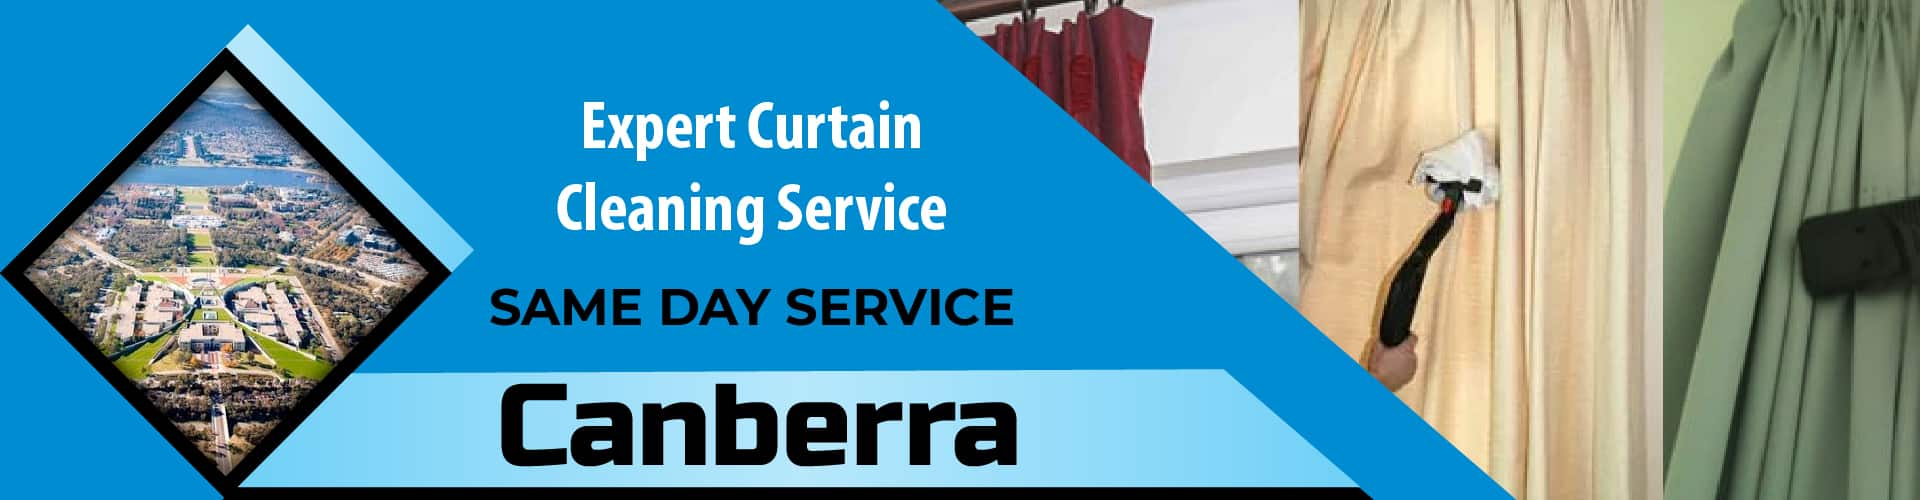 Expert Curtain Cleaning Canberra